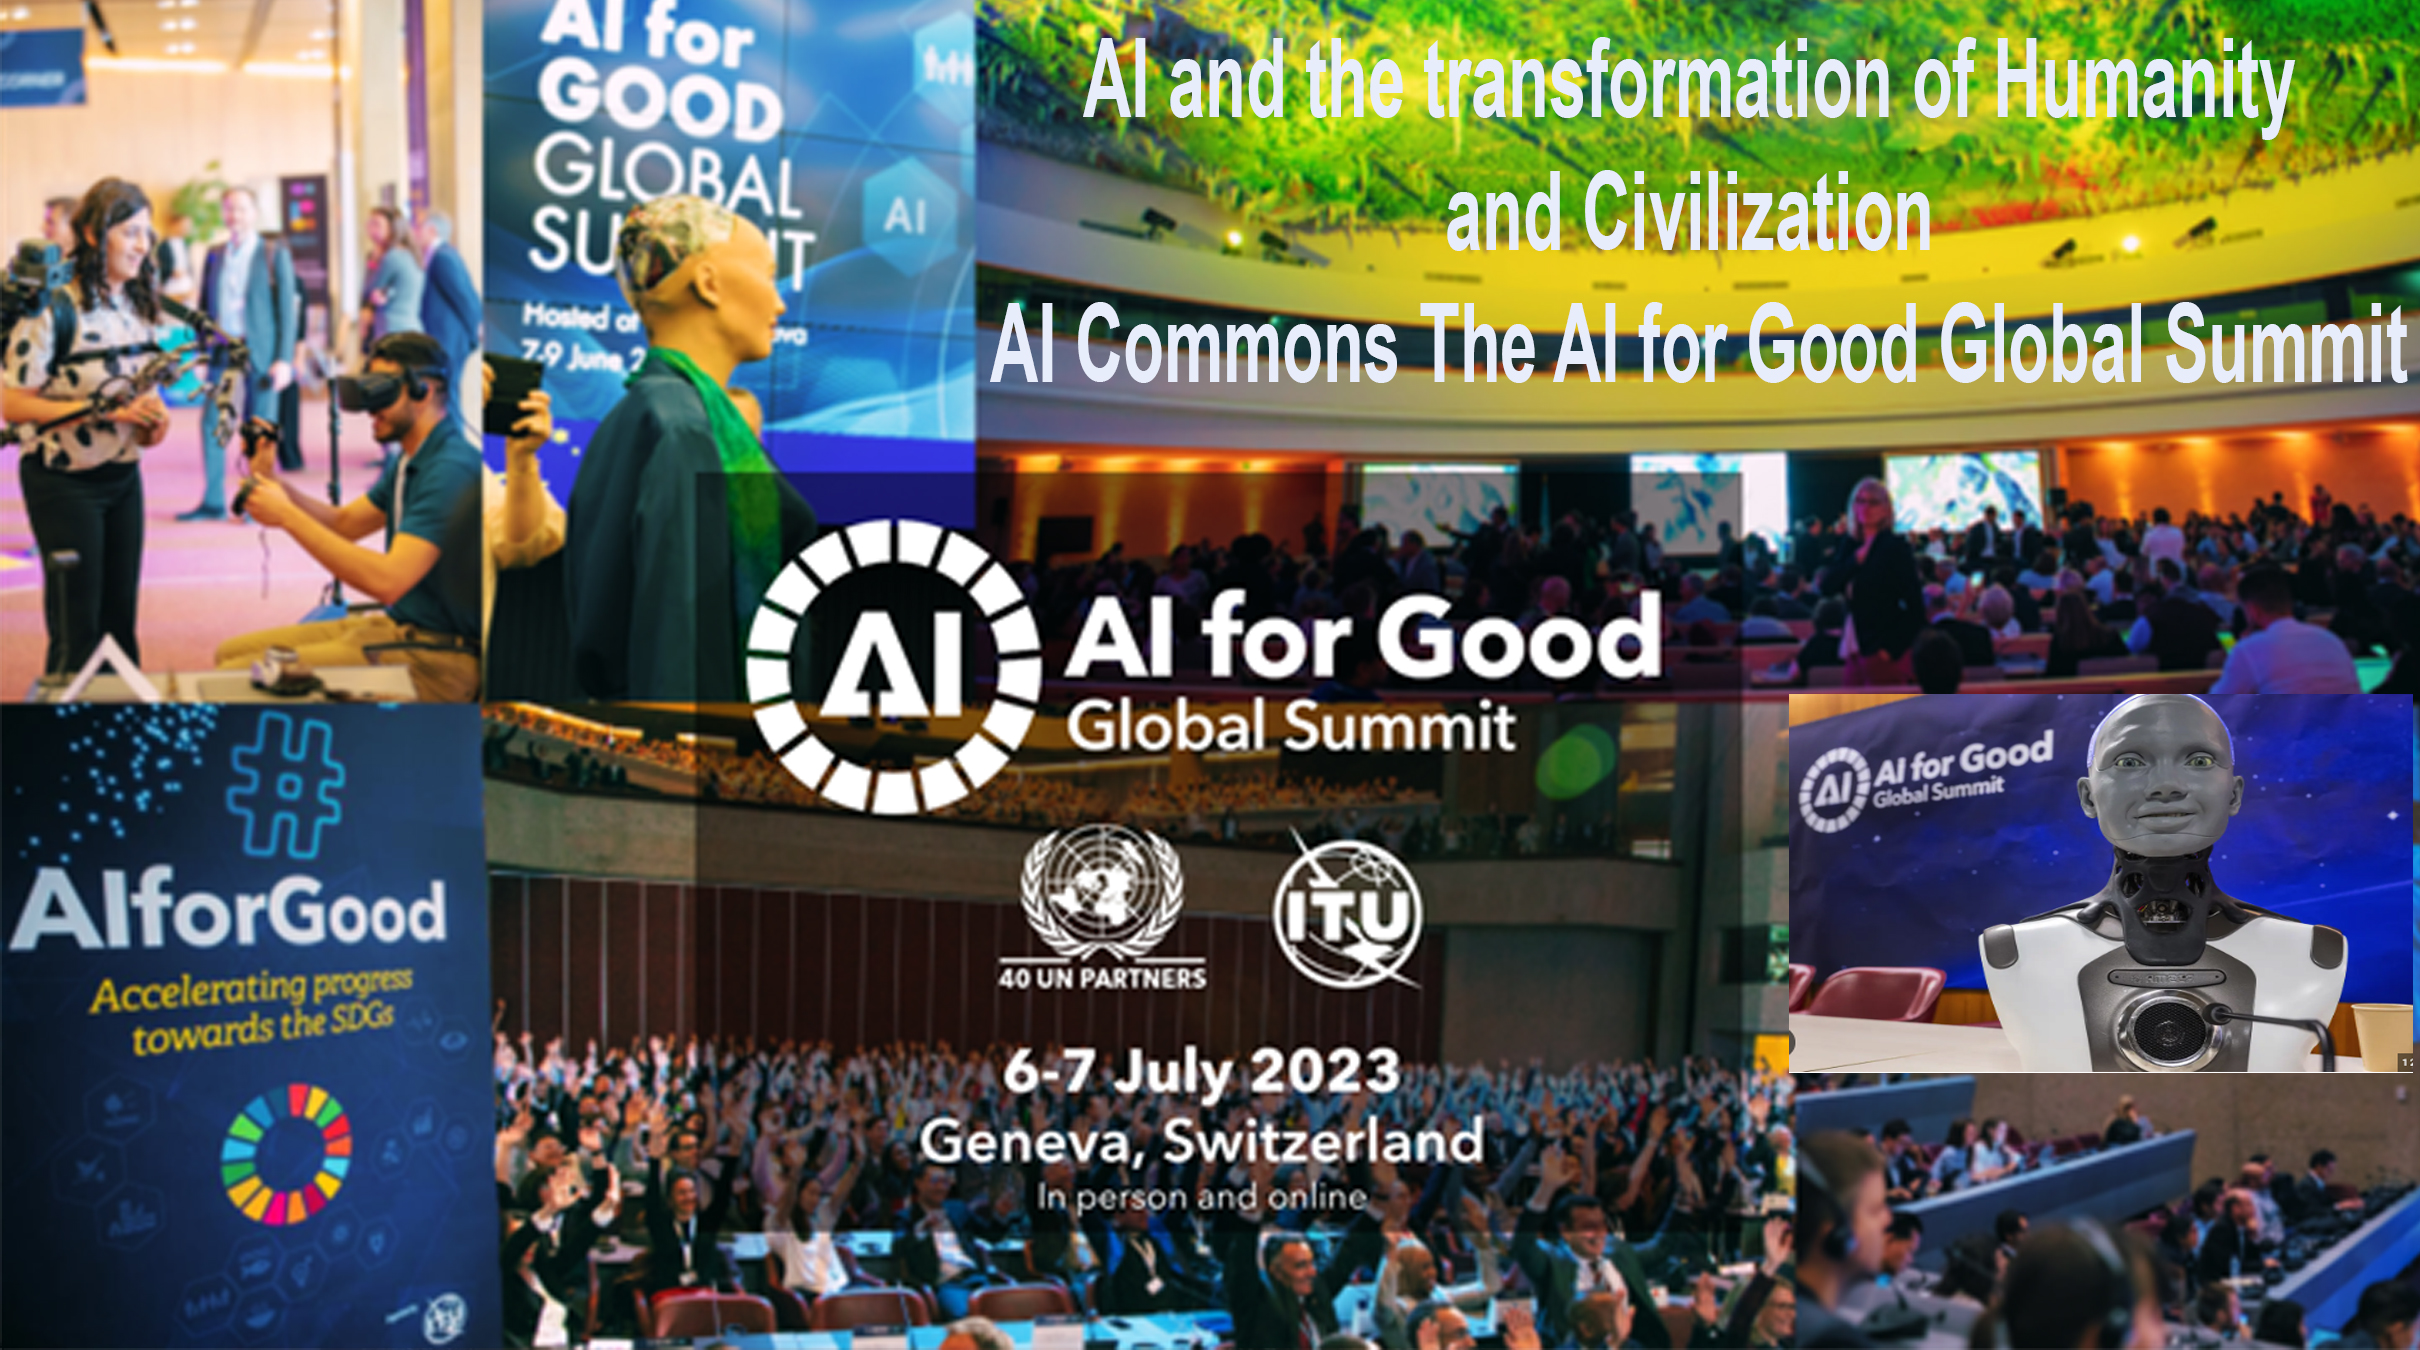 AFRICA-VOGUE-COVER-AI-and-the-transformation-of-Humanity-and-Civilization-AI-Commons-The-AI-for-Good-Global-Summit-DN-AFRICA-Media-Partner